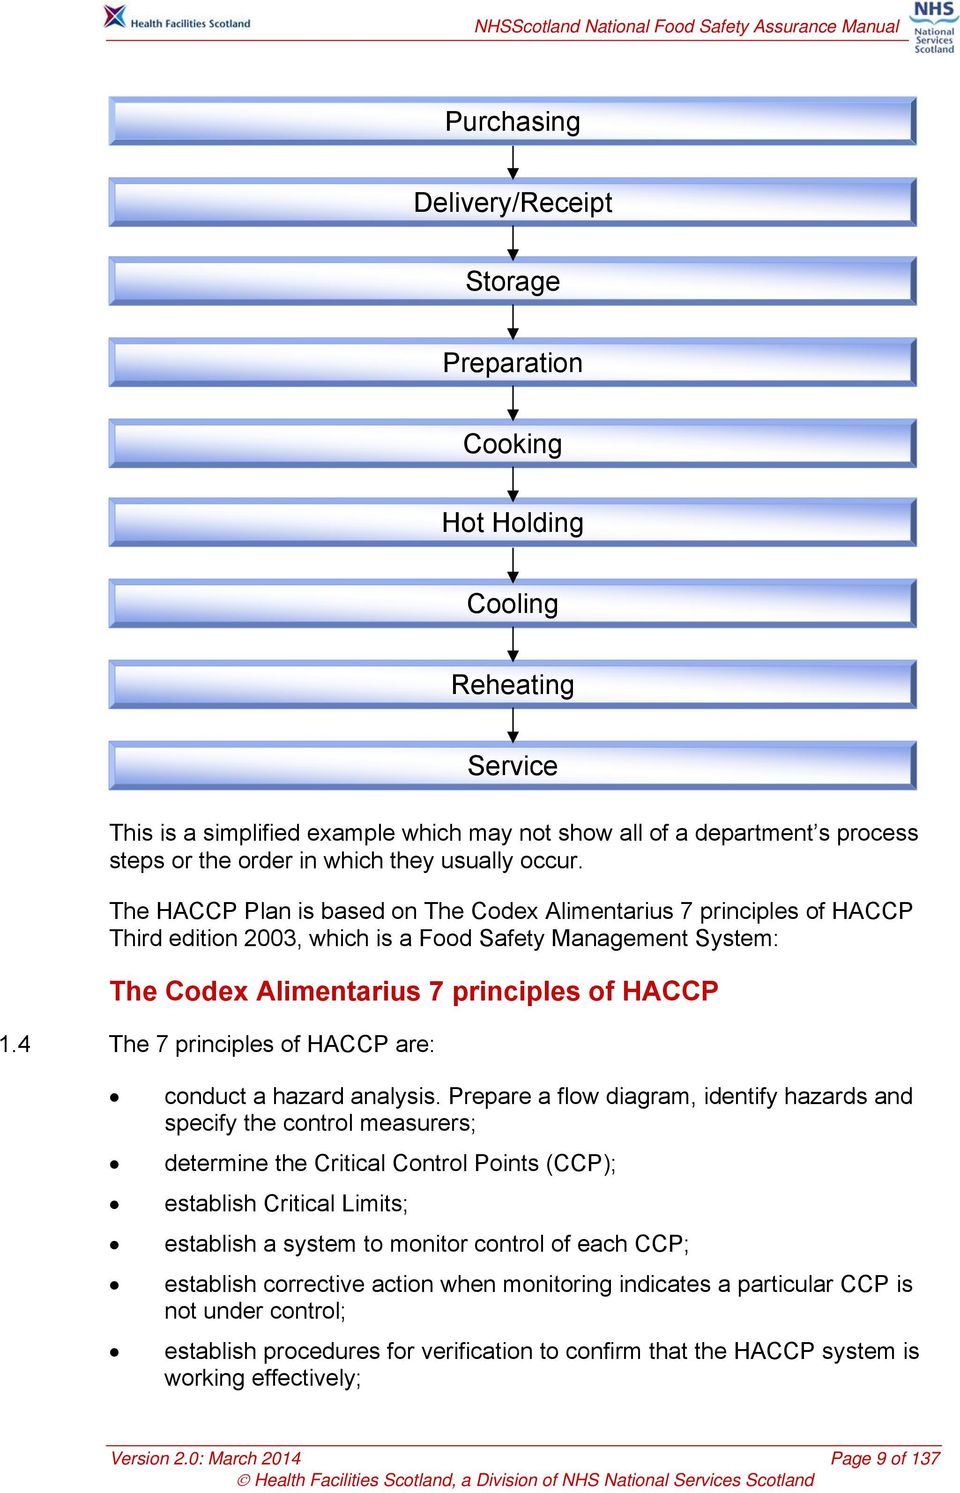 The HACCP Plan is based on The Codex Alimentarius 7 principles of HACCP Third edition 2003, which is a Food Safety Management System: The Codex Alimentarius 7 principles of HACCP 1.